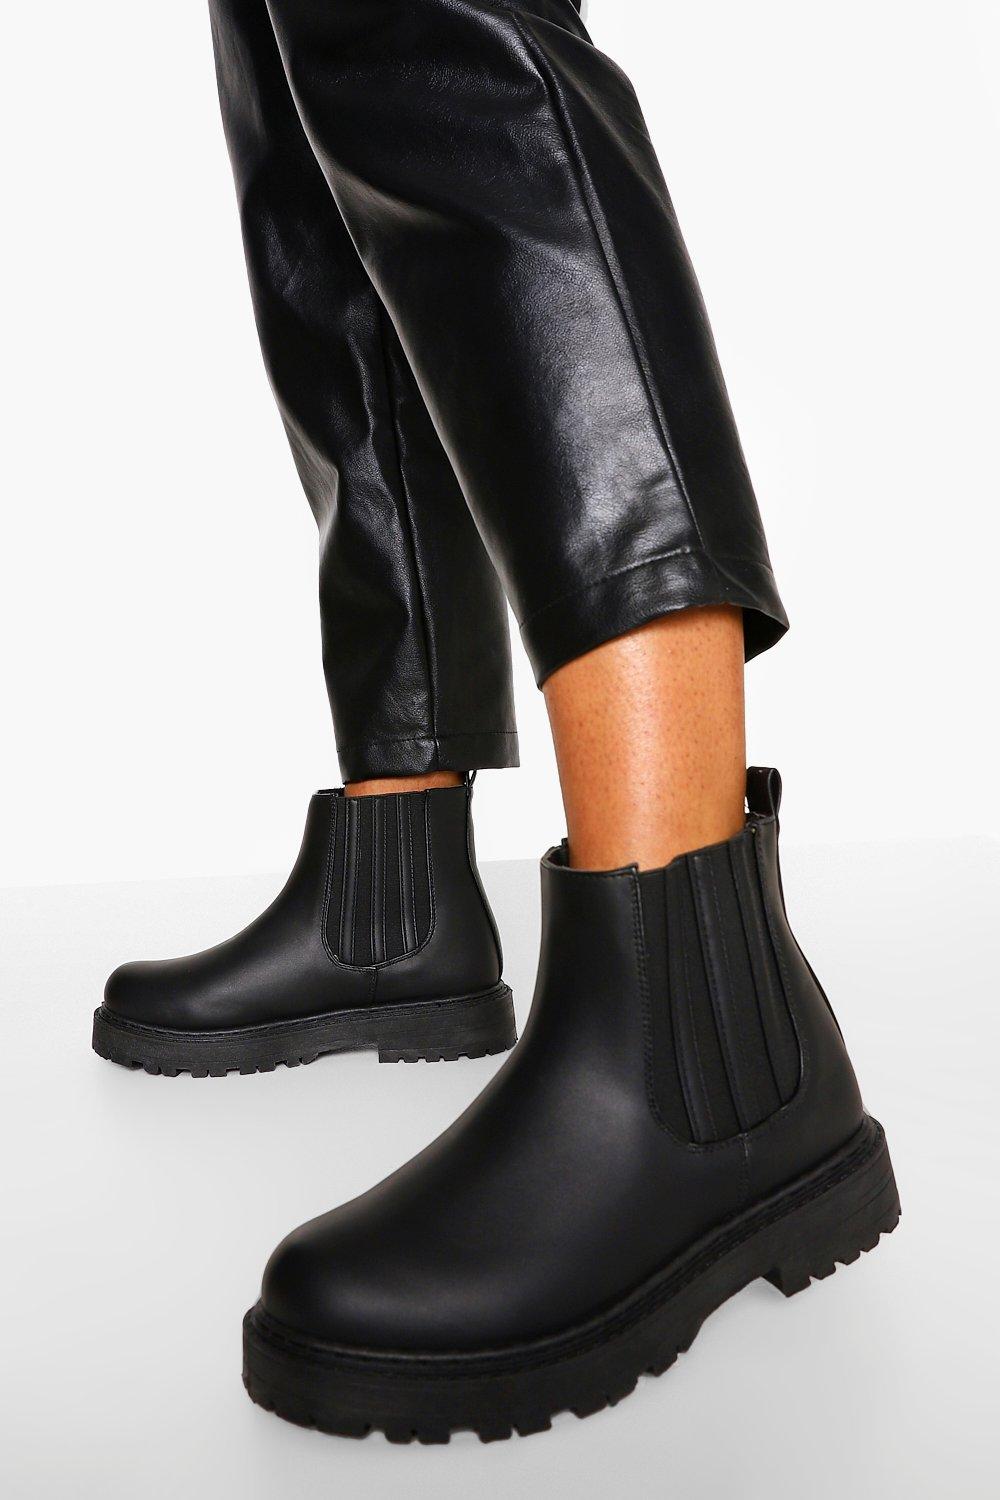 wide fitting wellington boots